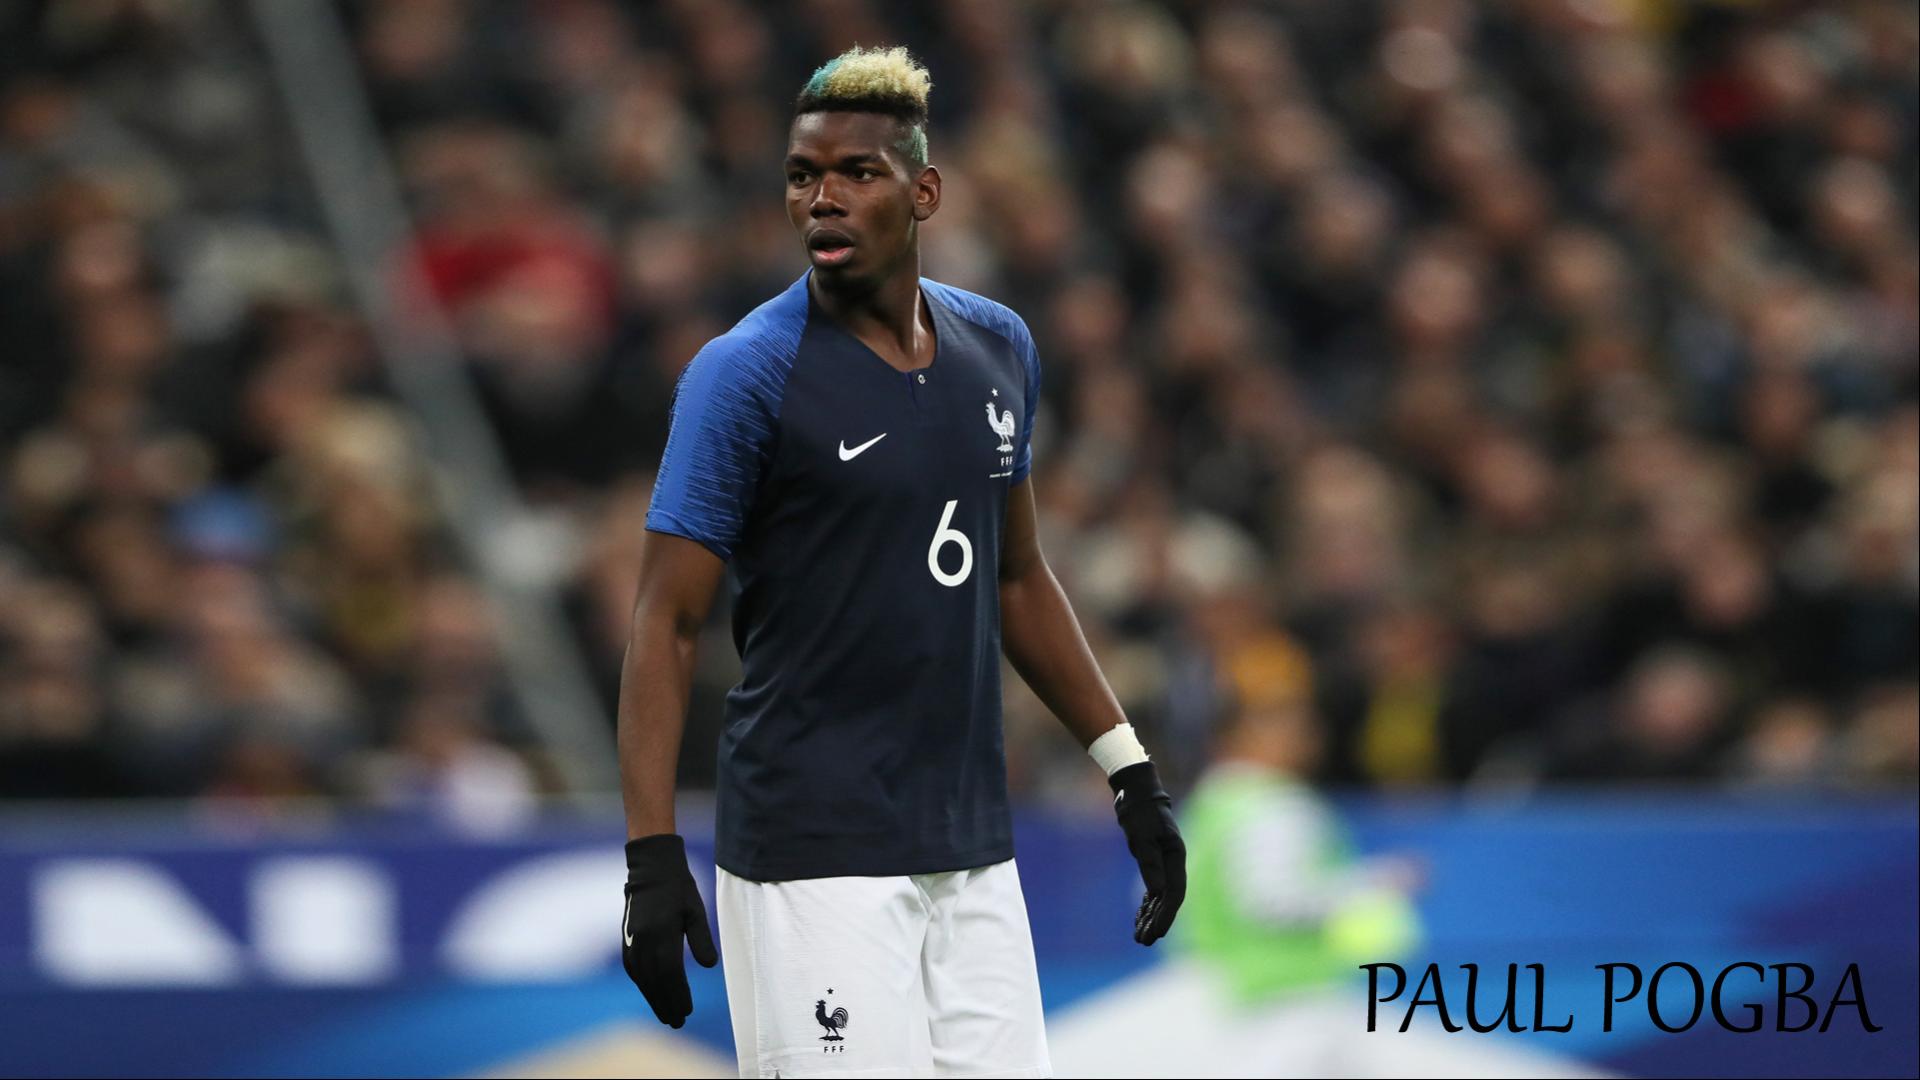 Paul Pogba with 2018 France Football Team Jersey for World Cup Wallpaper. Wallpaper Download. High Resolution Wallpaper